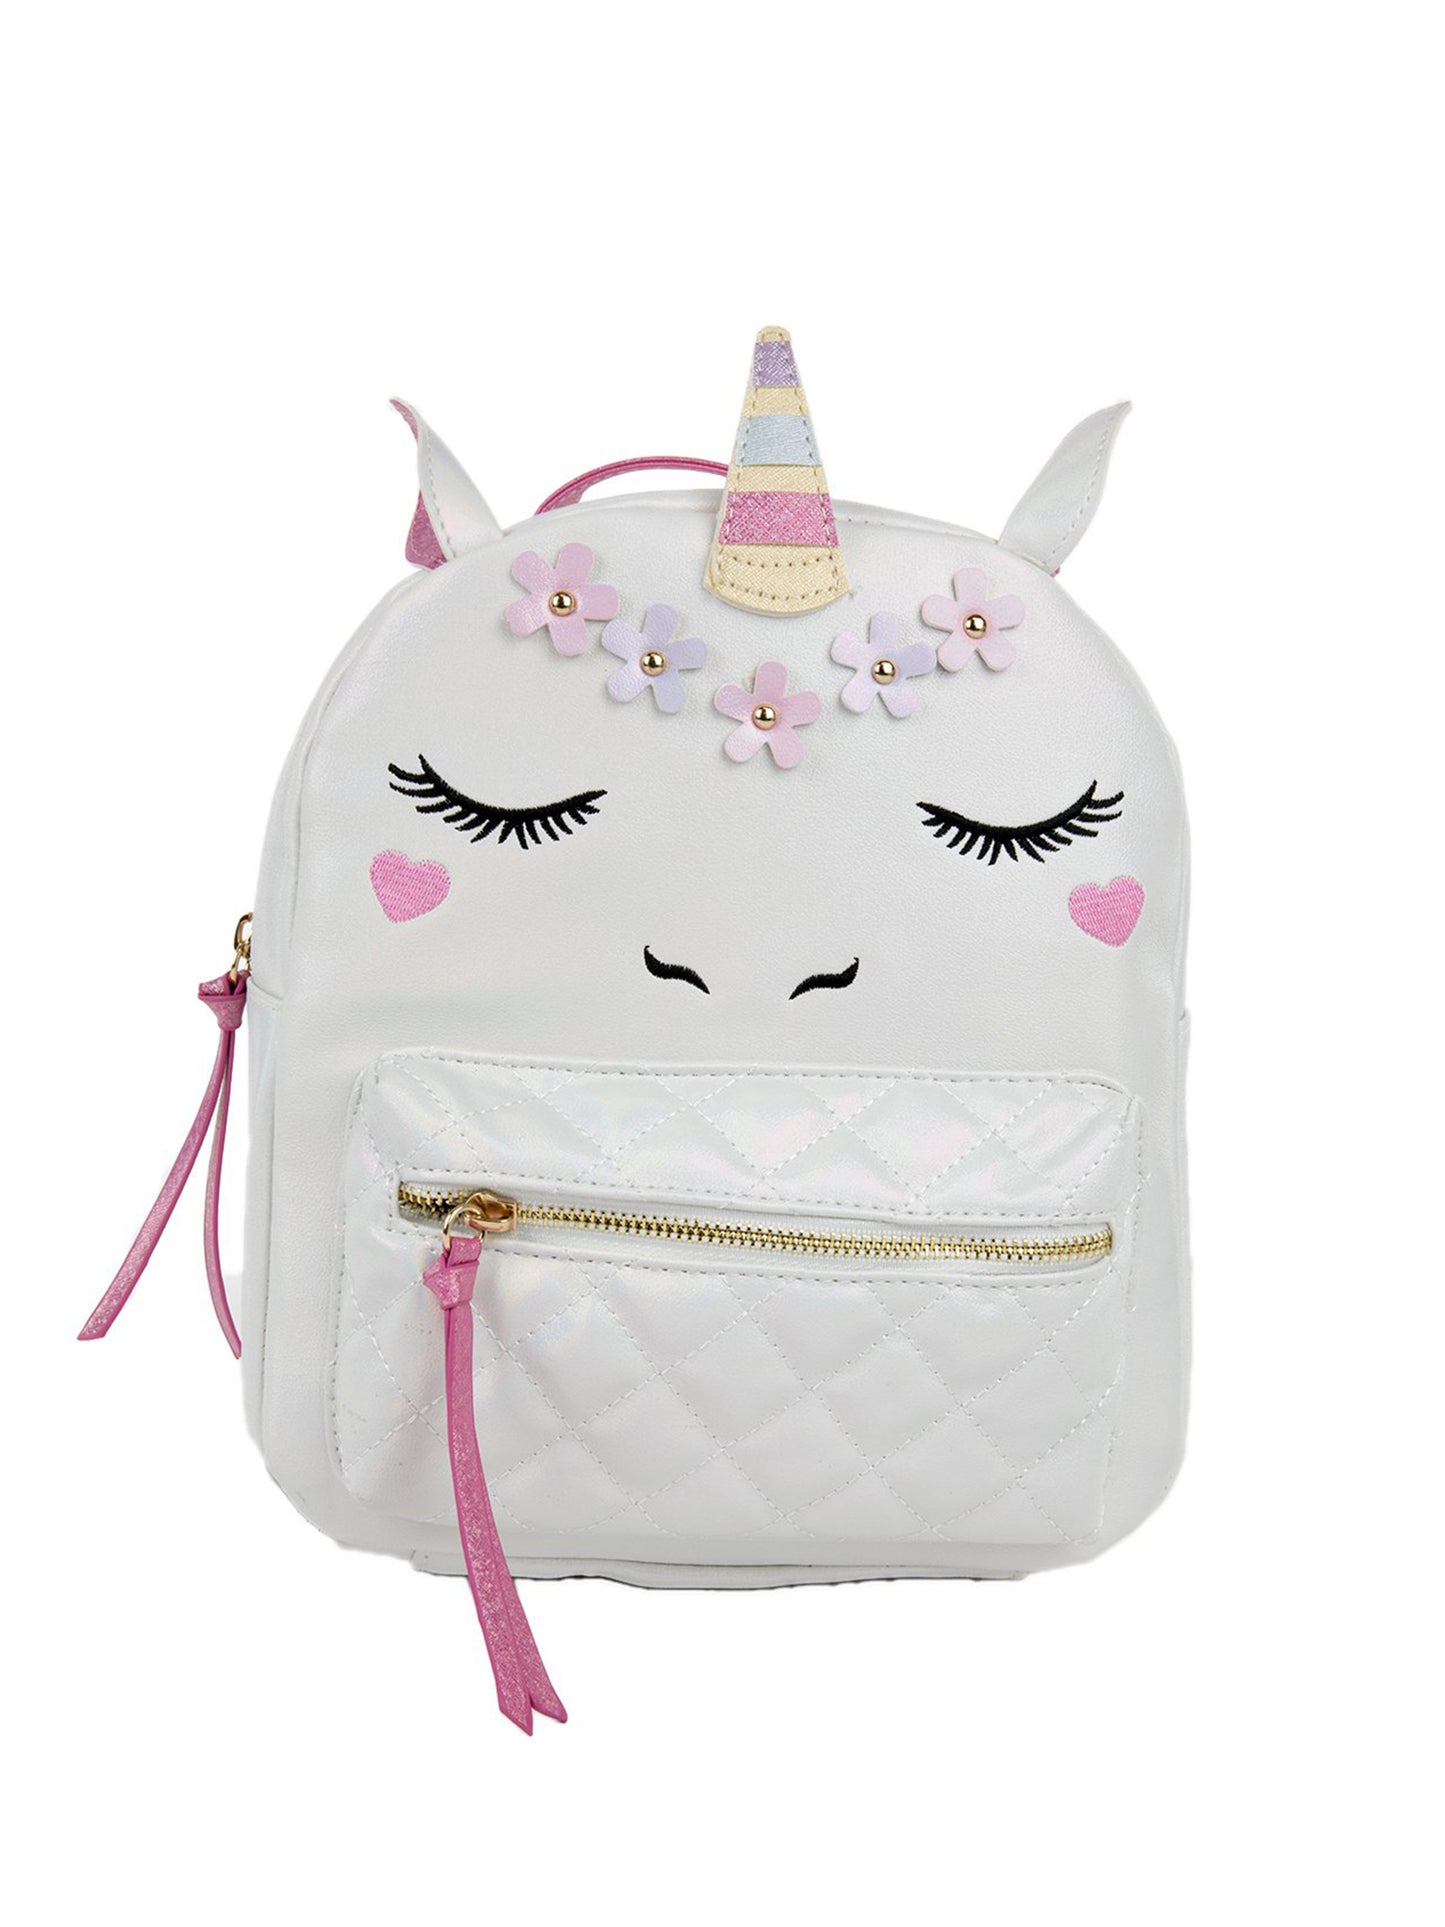 Under One Sky Mini Backpack Black - $15 (50% Off Retail) - From Desiree